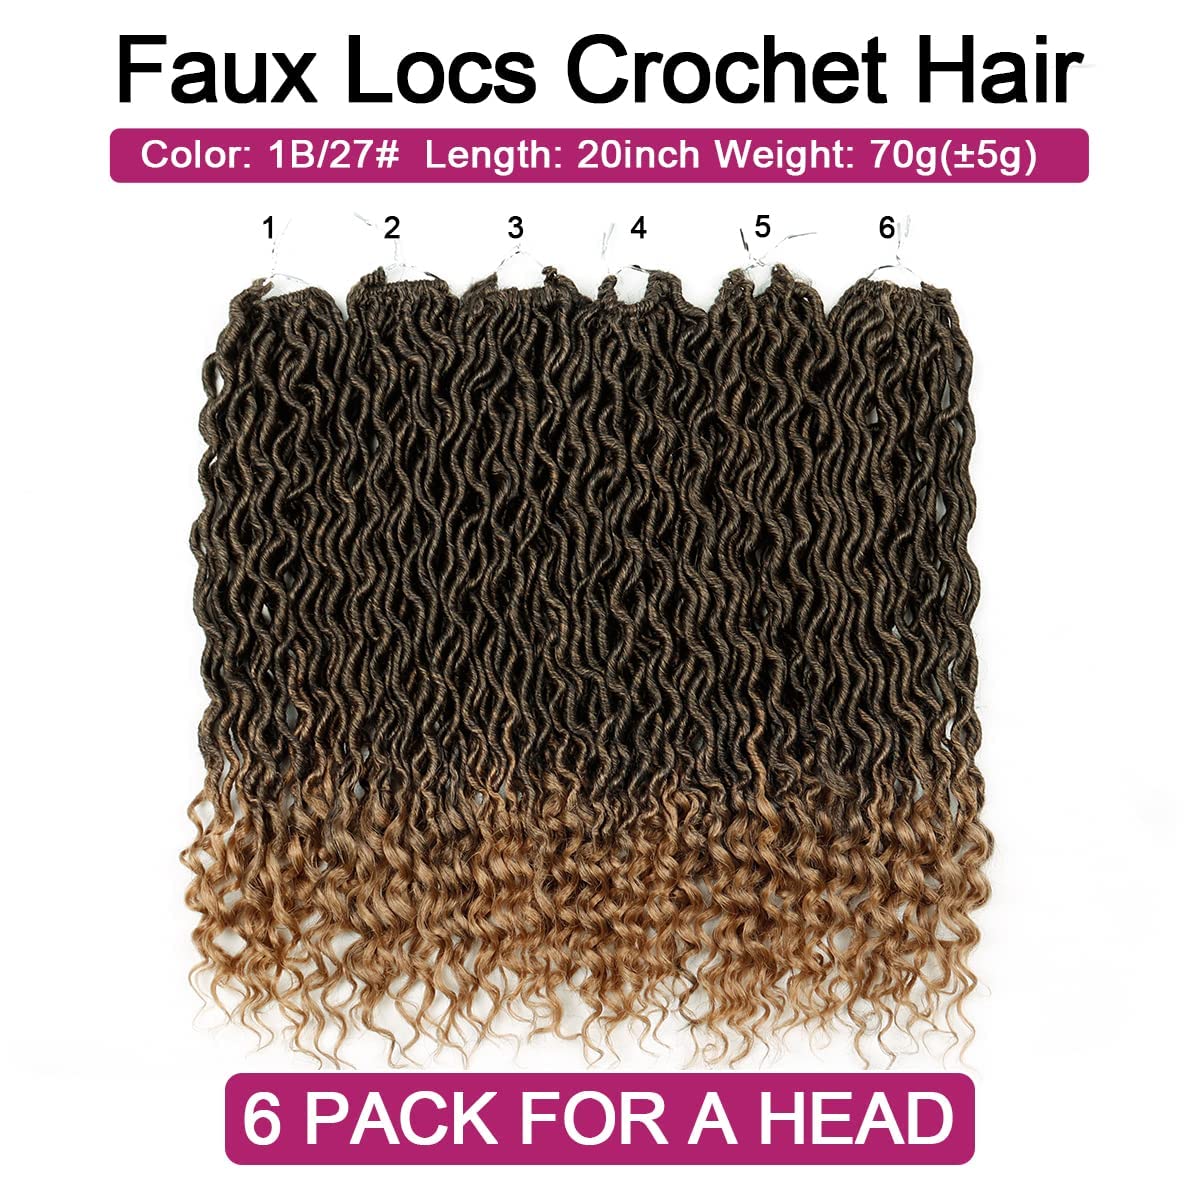 Goddess Locs Crochet Hair - 6 Packs 20 Inch Wavy Faux Locs Crochet Hair for Black Women, Ombre Faux Locs Crochet Hair with Curly Ends Synthetic Braids Hair Extensions (20Inch, T1B-27#)